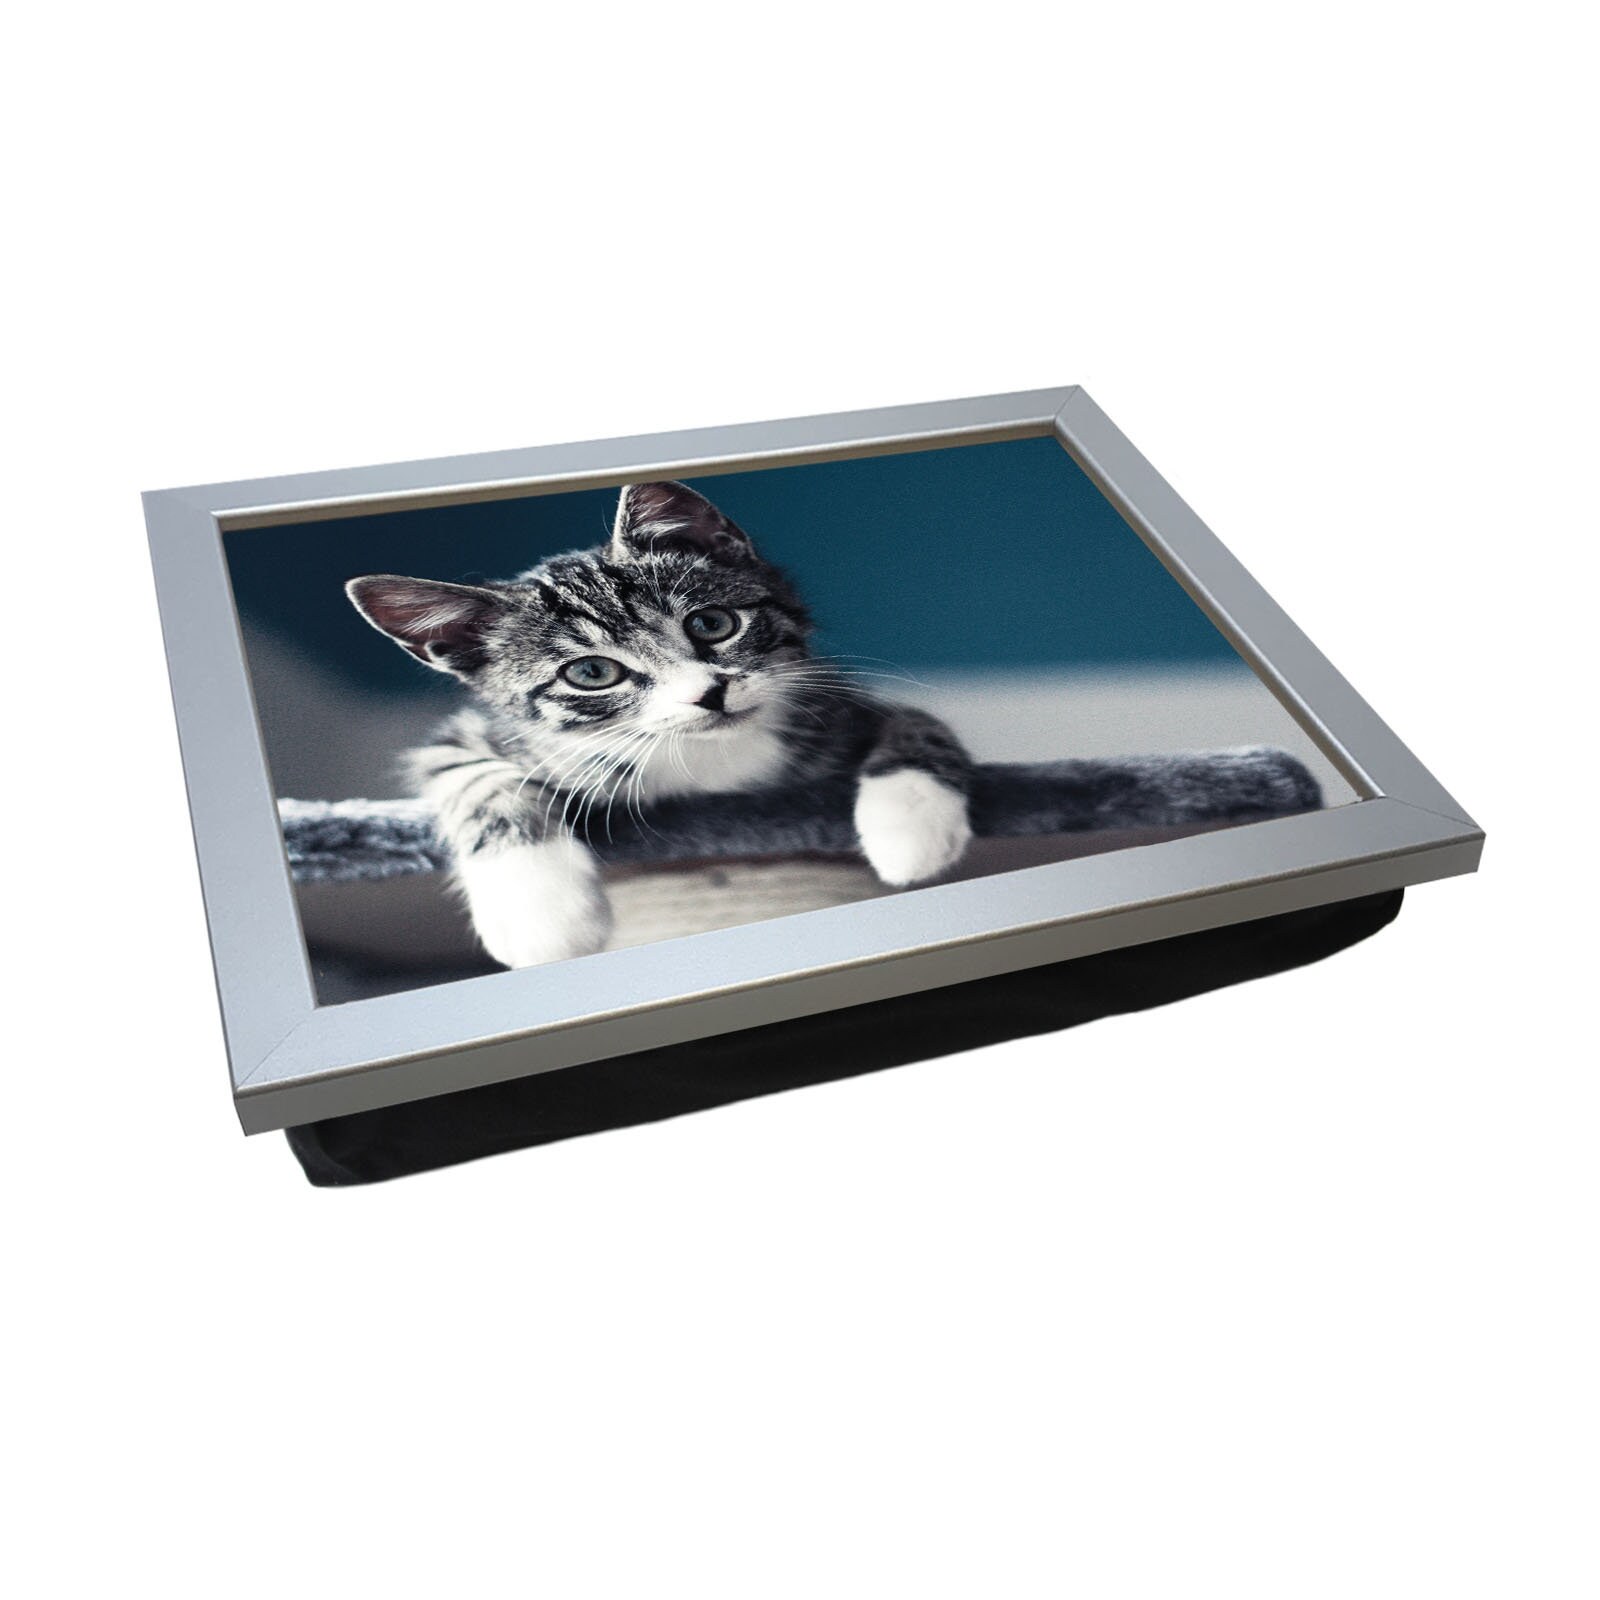 Lap Tray With Bean Bag Cushion, Beanbag Lap Trays for Eating, Lap Desk With  Pillow, Cool Cats, Cat Design Laptray, Purrfect Cat Lover Gift 